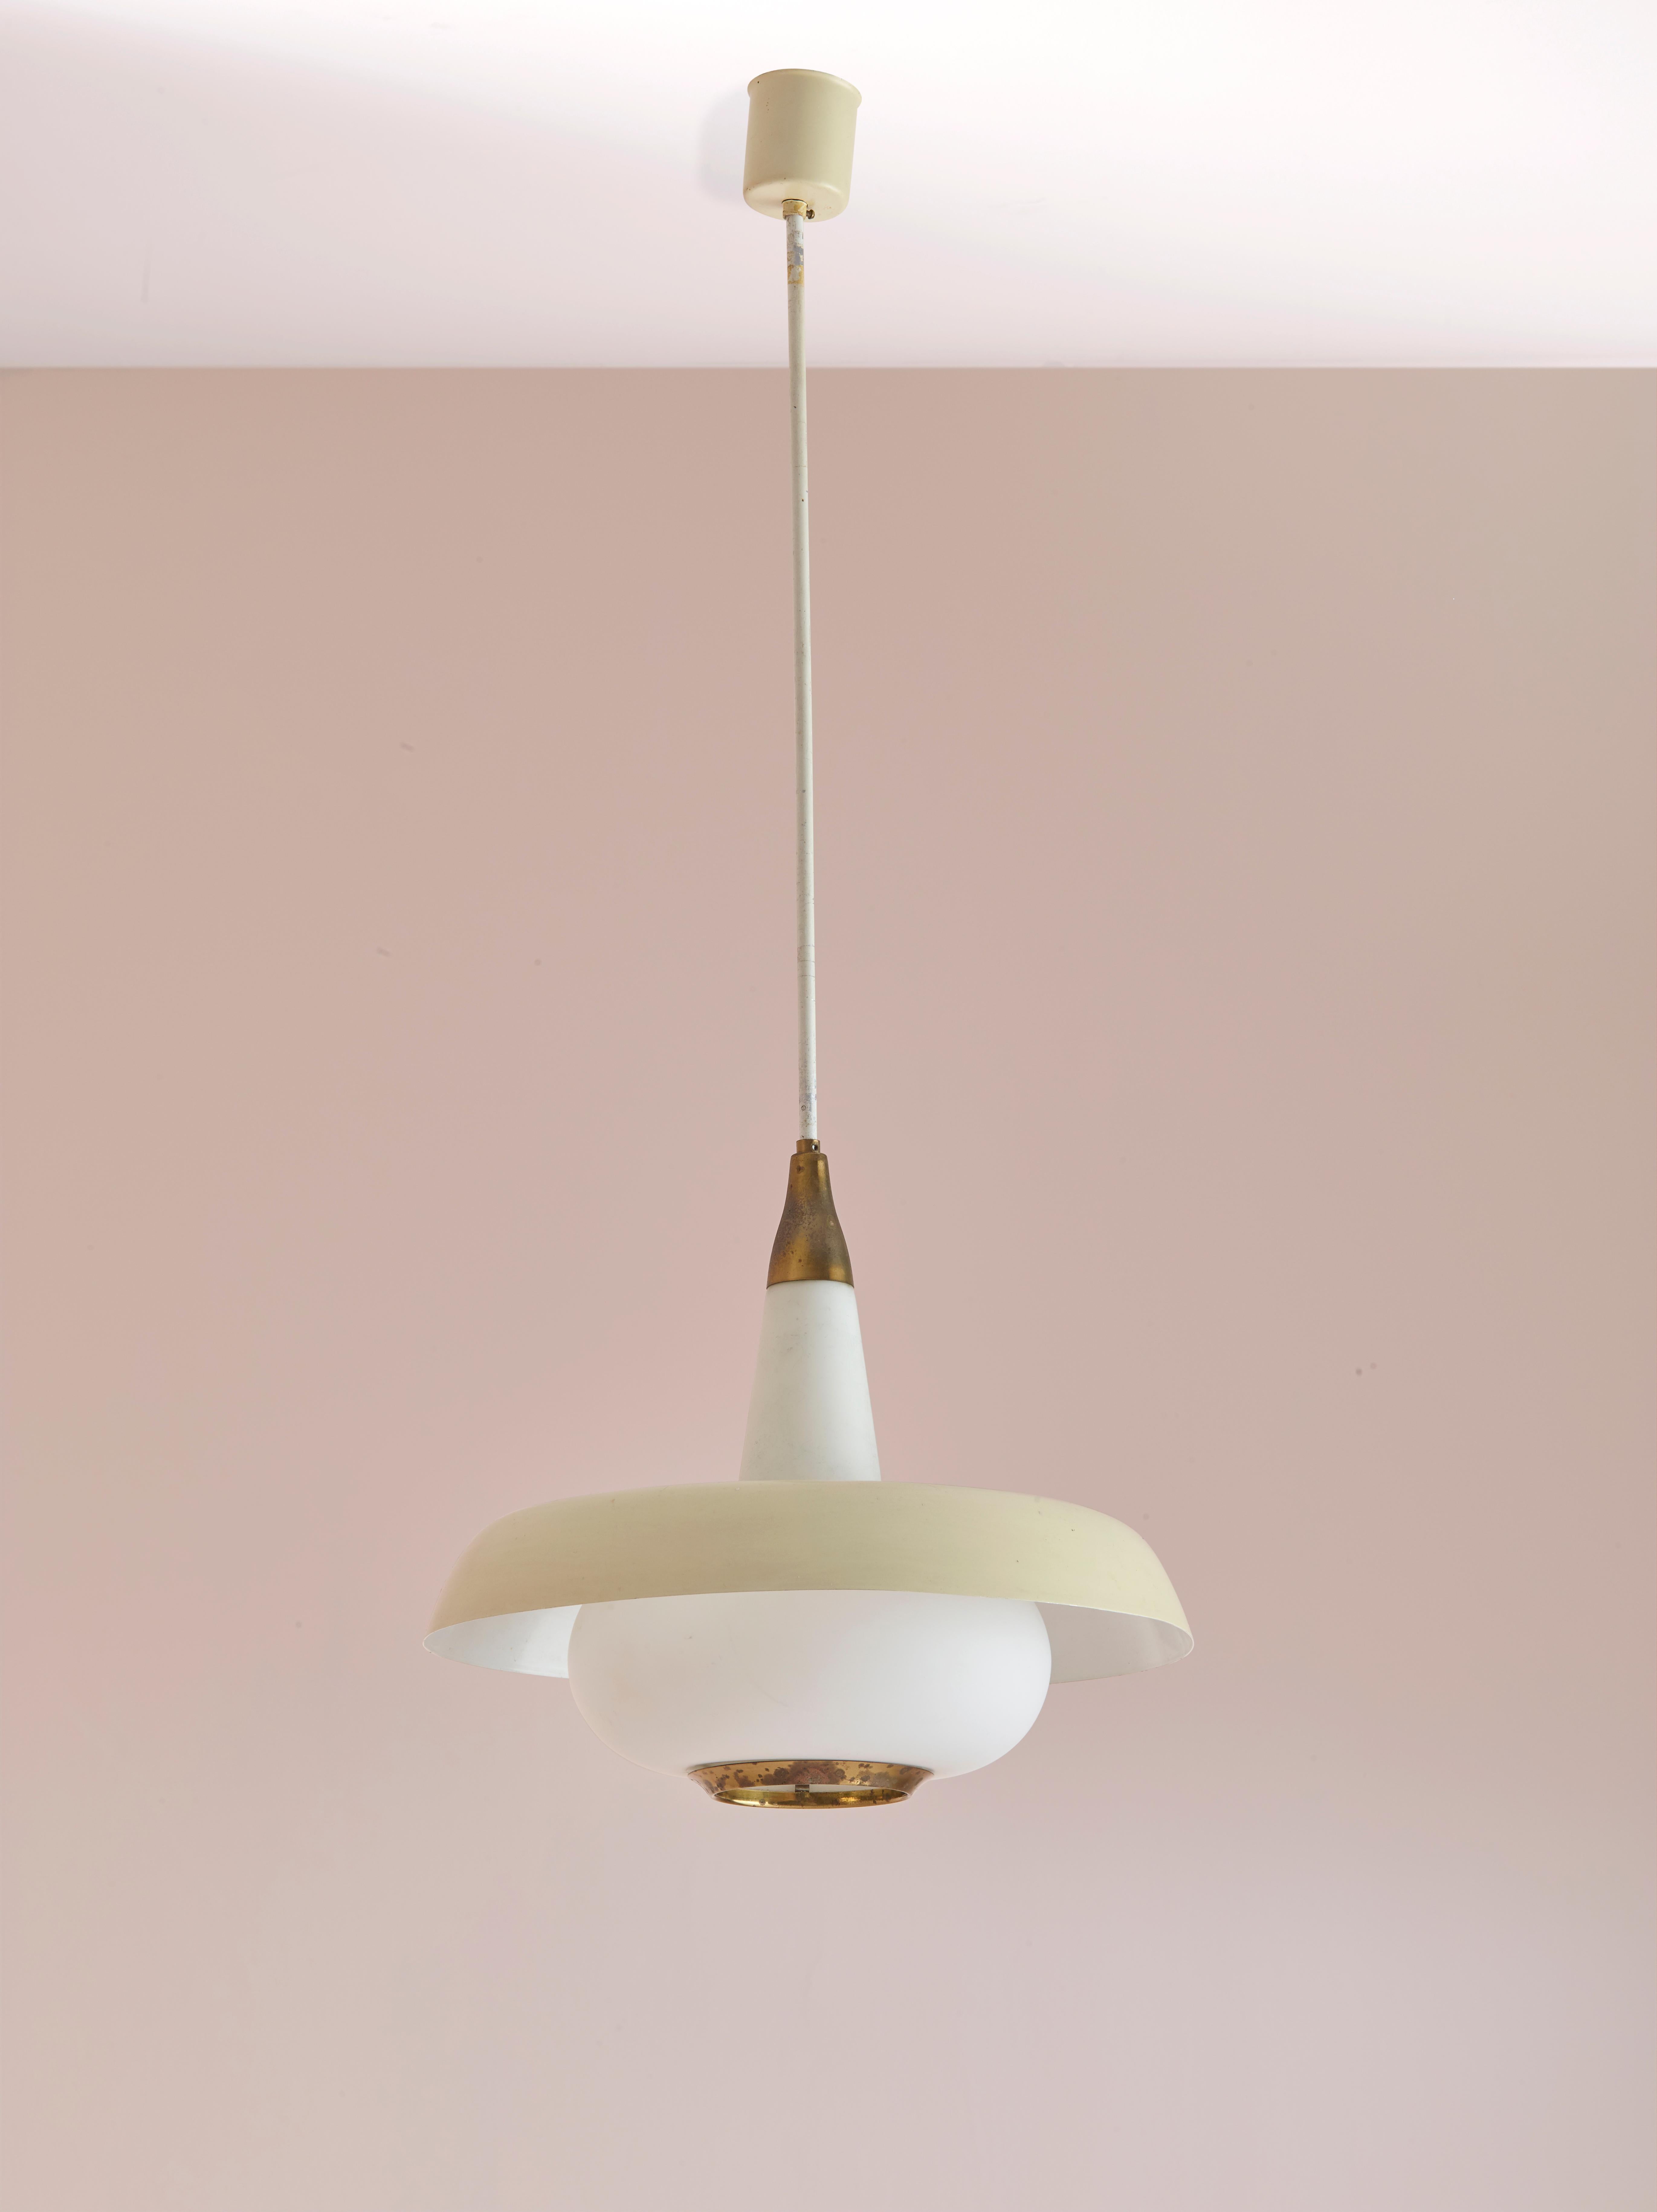 This elegant pendant light, attributed to the renowned Italian design company Stilnovo, is a beautiful example of Mid-Century Modern lighting design. Manufactured in the 1950s, it features an opaline glass diffuser and a milky white painted aluminum